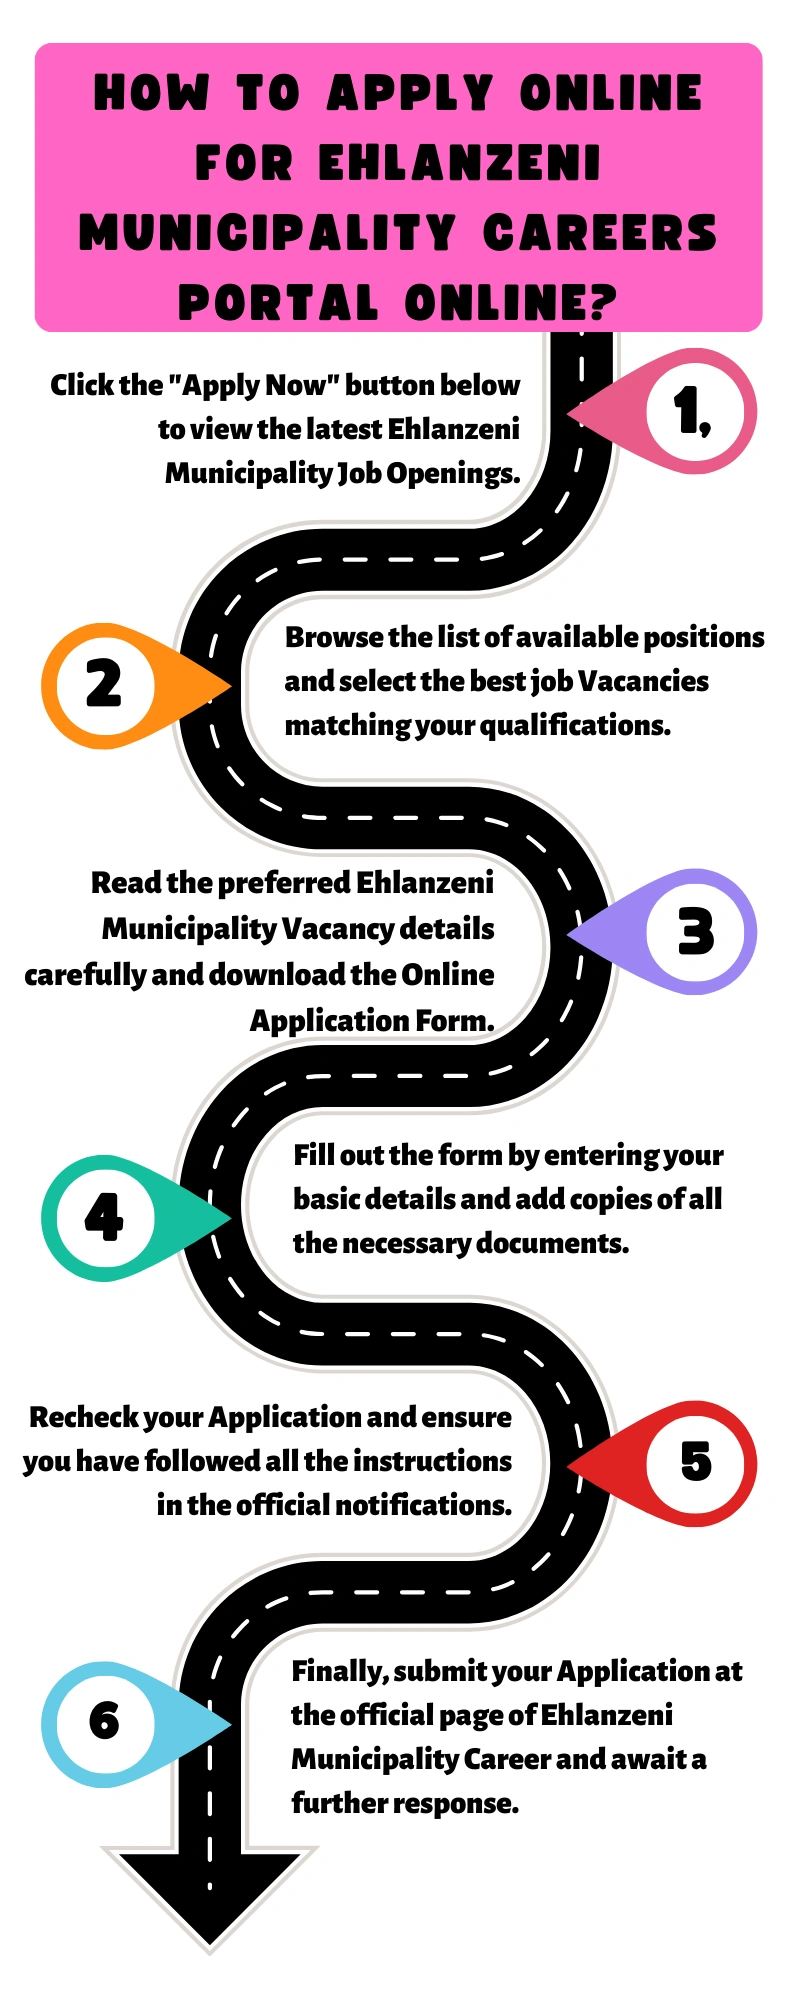 How to Apply online for Ehlanzeni Municipality Careers Portal Online?